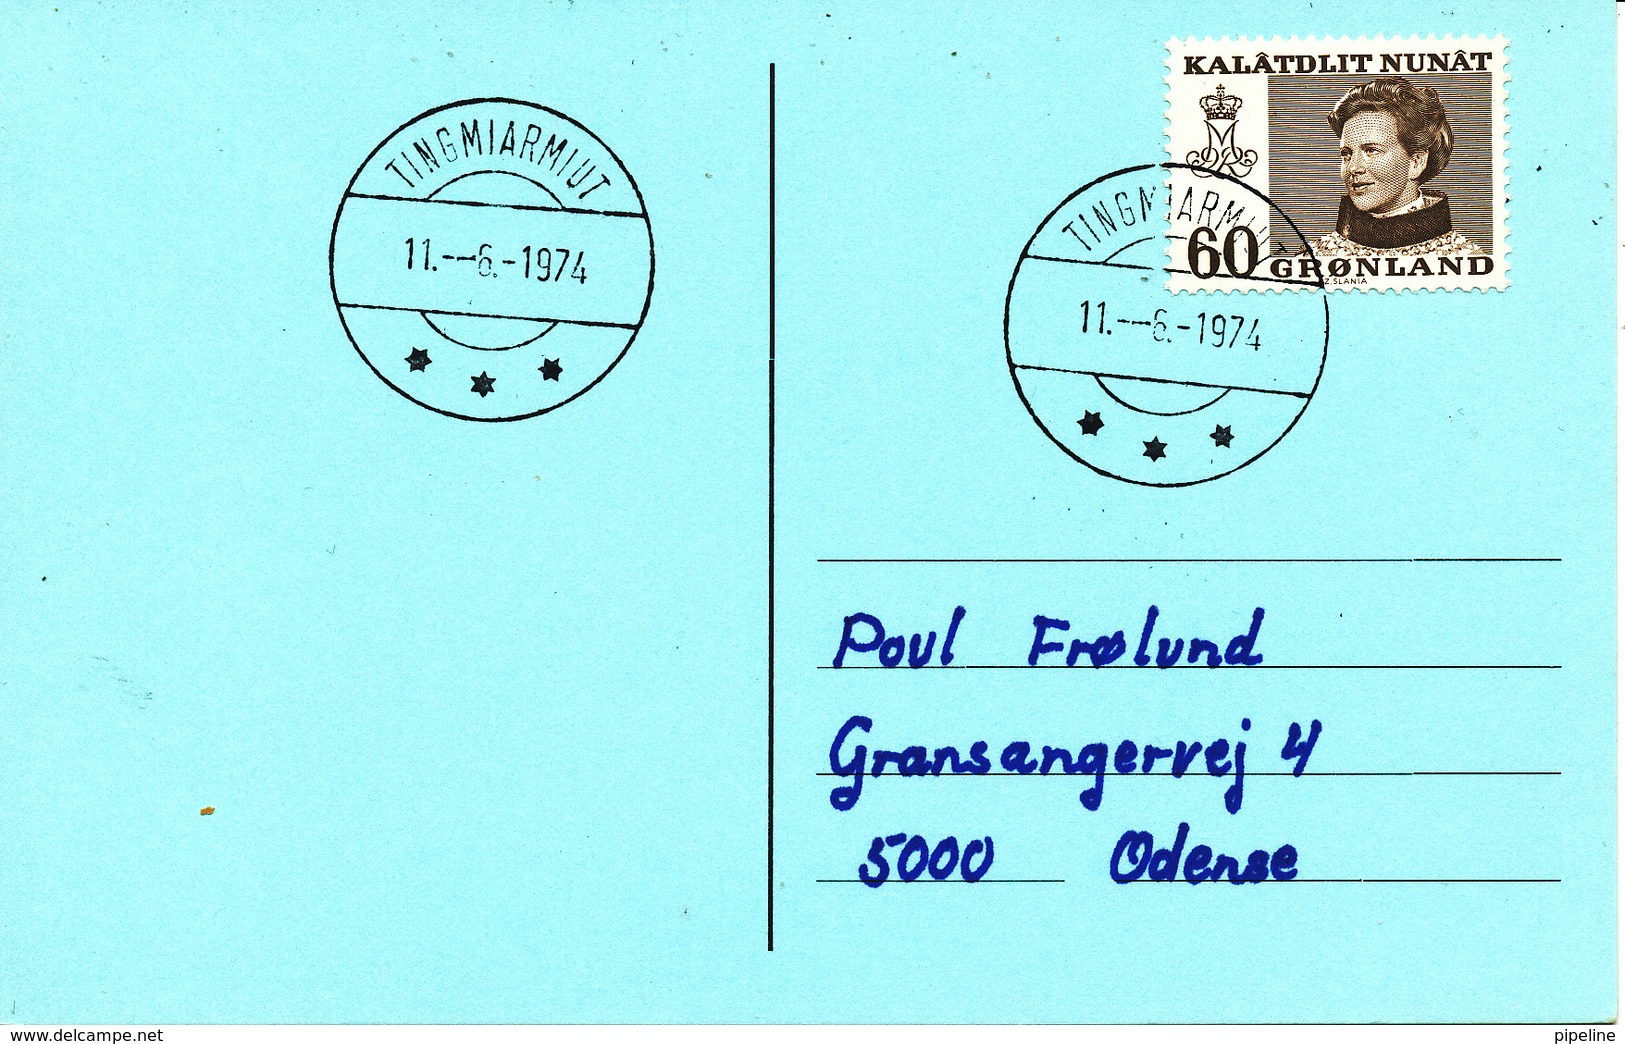 Greenland Card Sent To Denmark Tingmiarmiut 11-6-1974 Single Franked - Covers & Documents